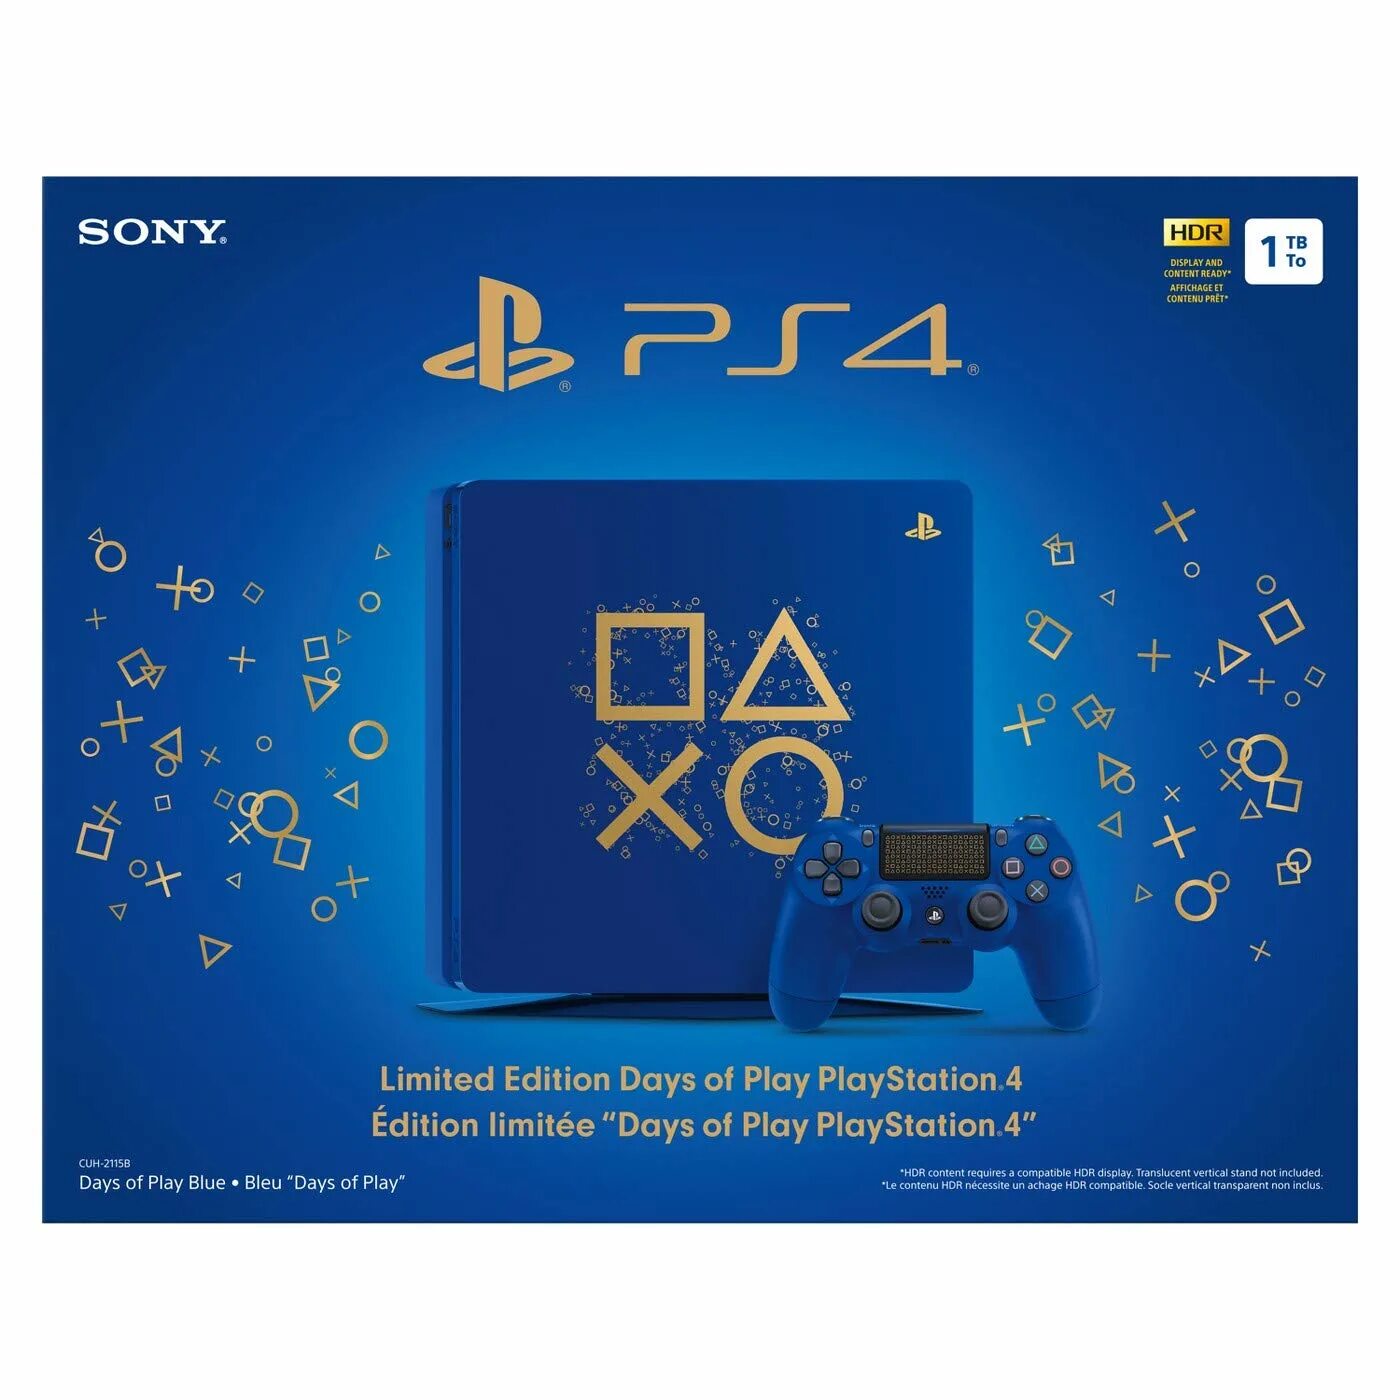 Ps4 gold edition. Ps4 Slim Gold Edition 1tb. Sony PLAYSTATION 4 Pro Limited Edition Blue. Ps4 Slim синяя Limited. Ps4 Slim Limited Edition Days of Play.